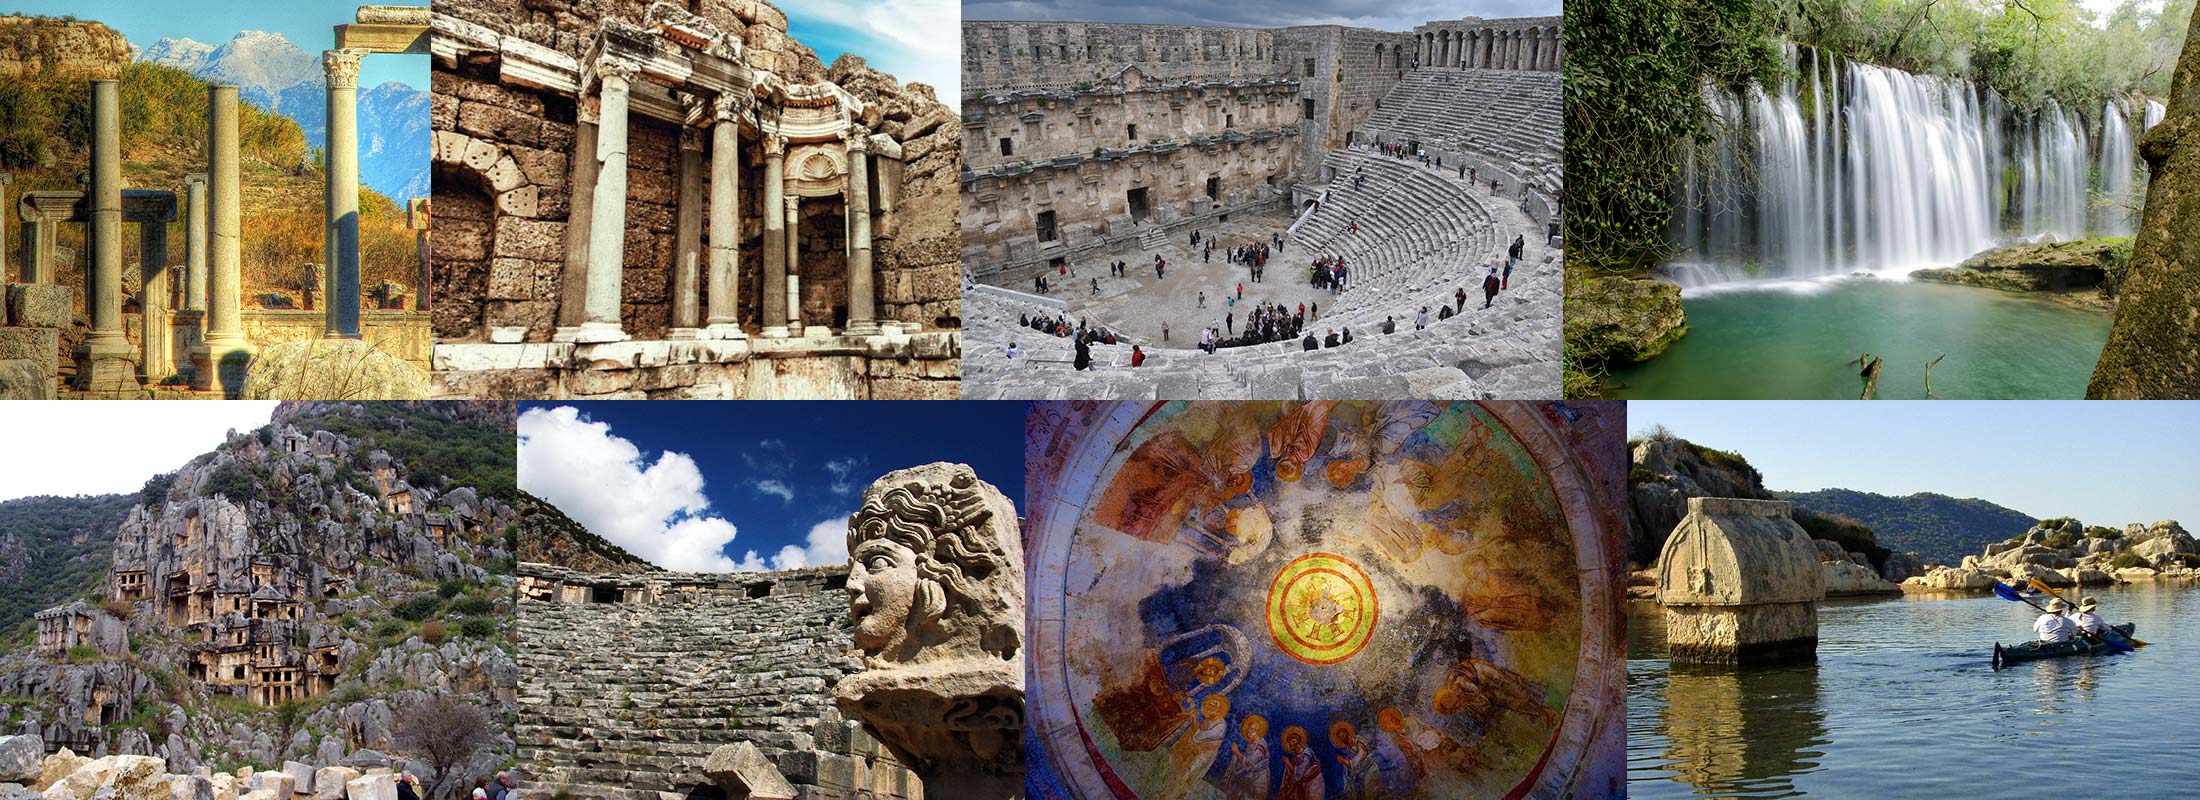 3-days-antalya-package-tours-by-bus